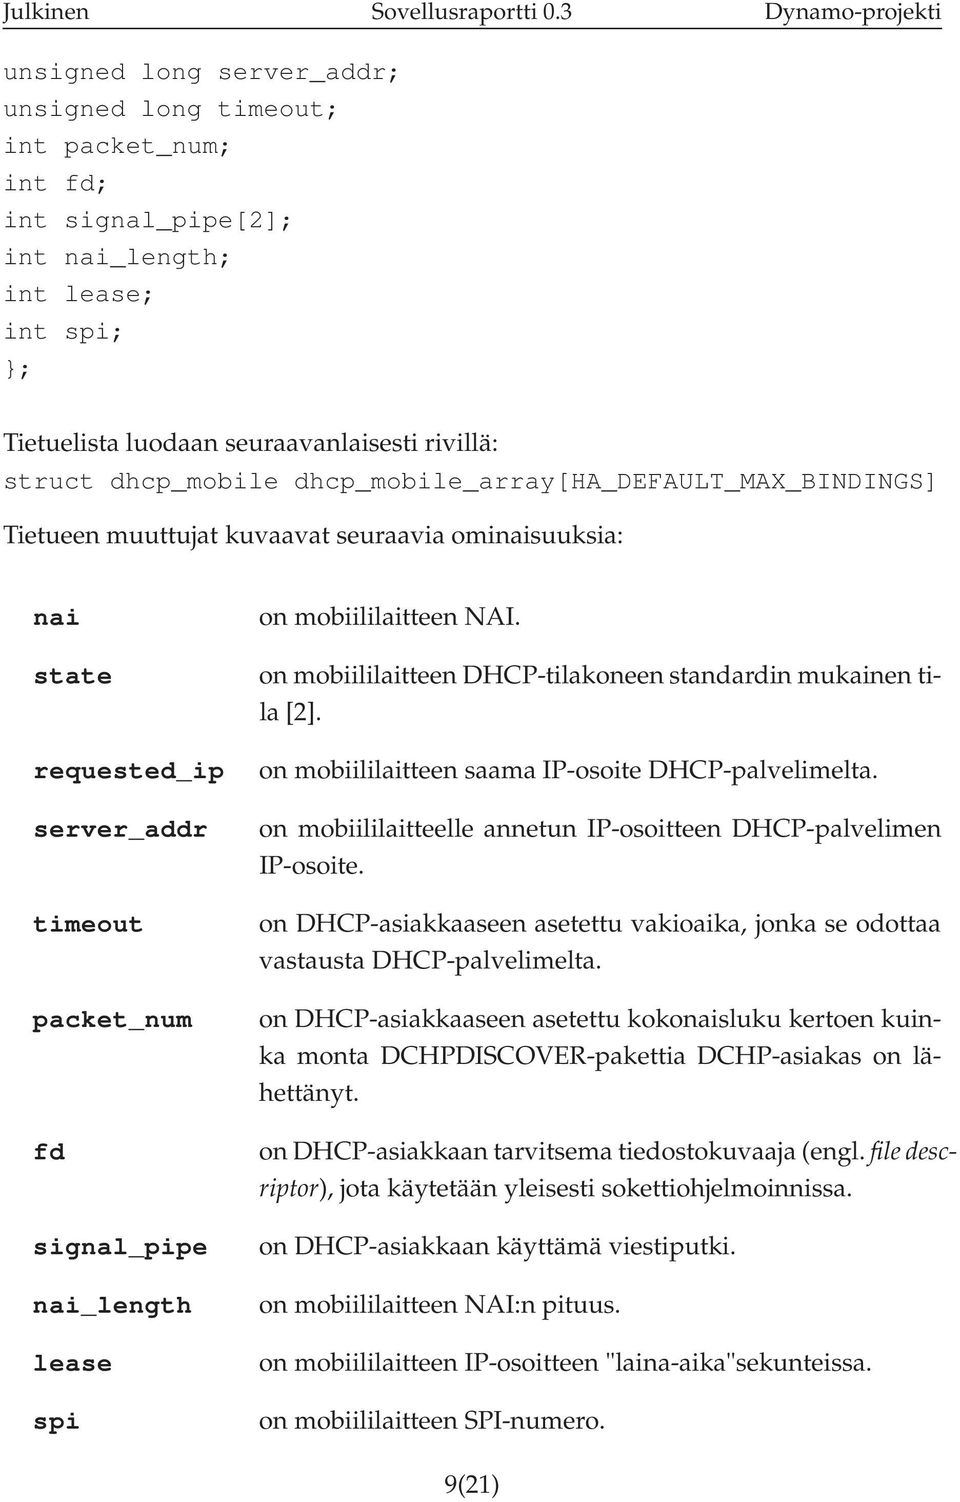 struct dhcp_mobile dhcp_mobile_array[ha_default_max_bindings] Tietueen muuttujat kuvaavat seuraavia ominaisuuksia: nai state requested_ip server_addr timeout packet_num fd signal_pipe nai_length